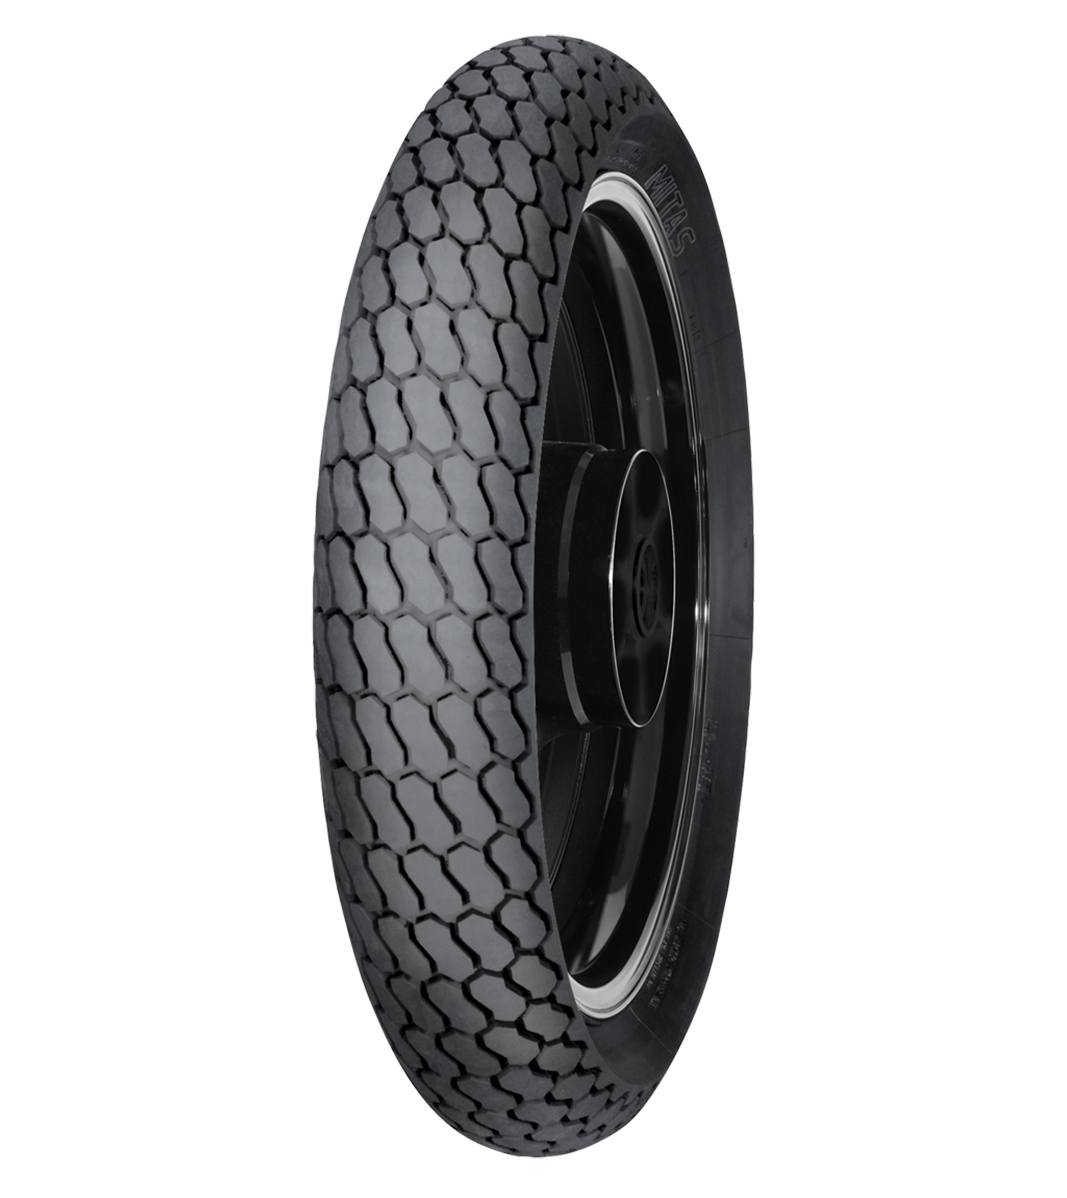 Mitas H-18 HIGHWAY 140/80-19 (27.5x7.5-19) Motorcycle Sport On-Road ROAD 71H No Stripe Tubeless Rear Tire, 223440, 140/80-19, H-18 Highway, Motorcycle Sport, On-Road, Rear, Sport, Tires - Imported and distributed in North & South America by Lindeco Genuine Powersports - Premier Powersports Equipment and Accessories for Motorcycle Enthusiasts, Professional Riders and Dealers.